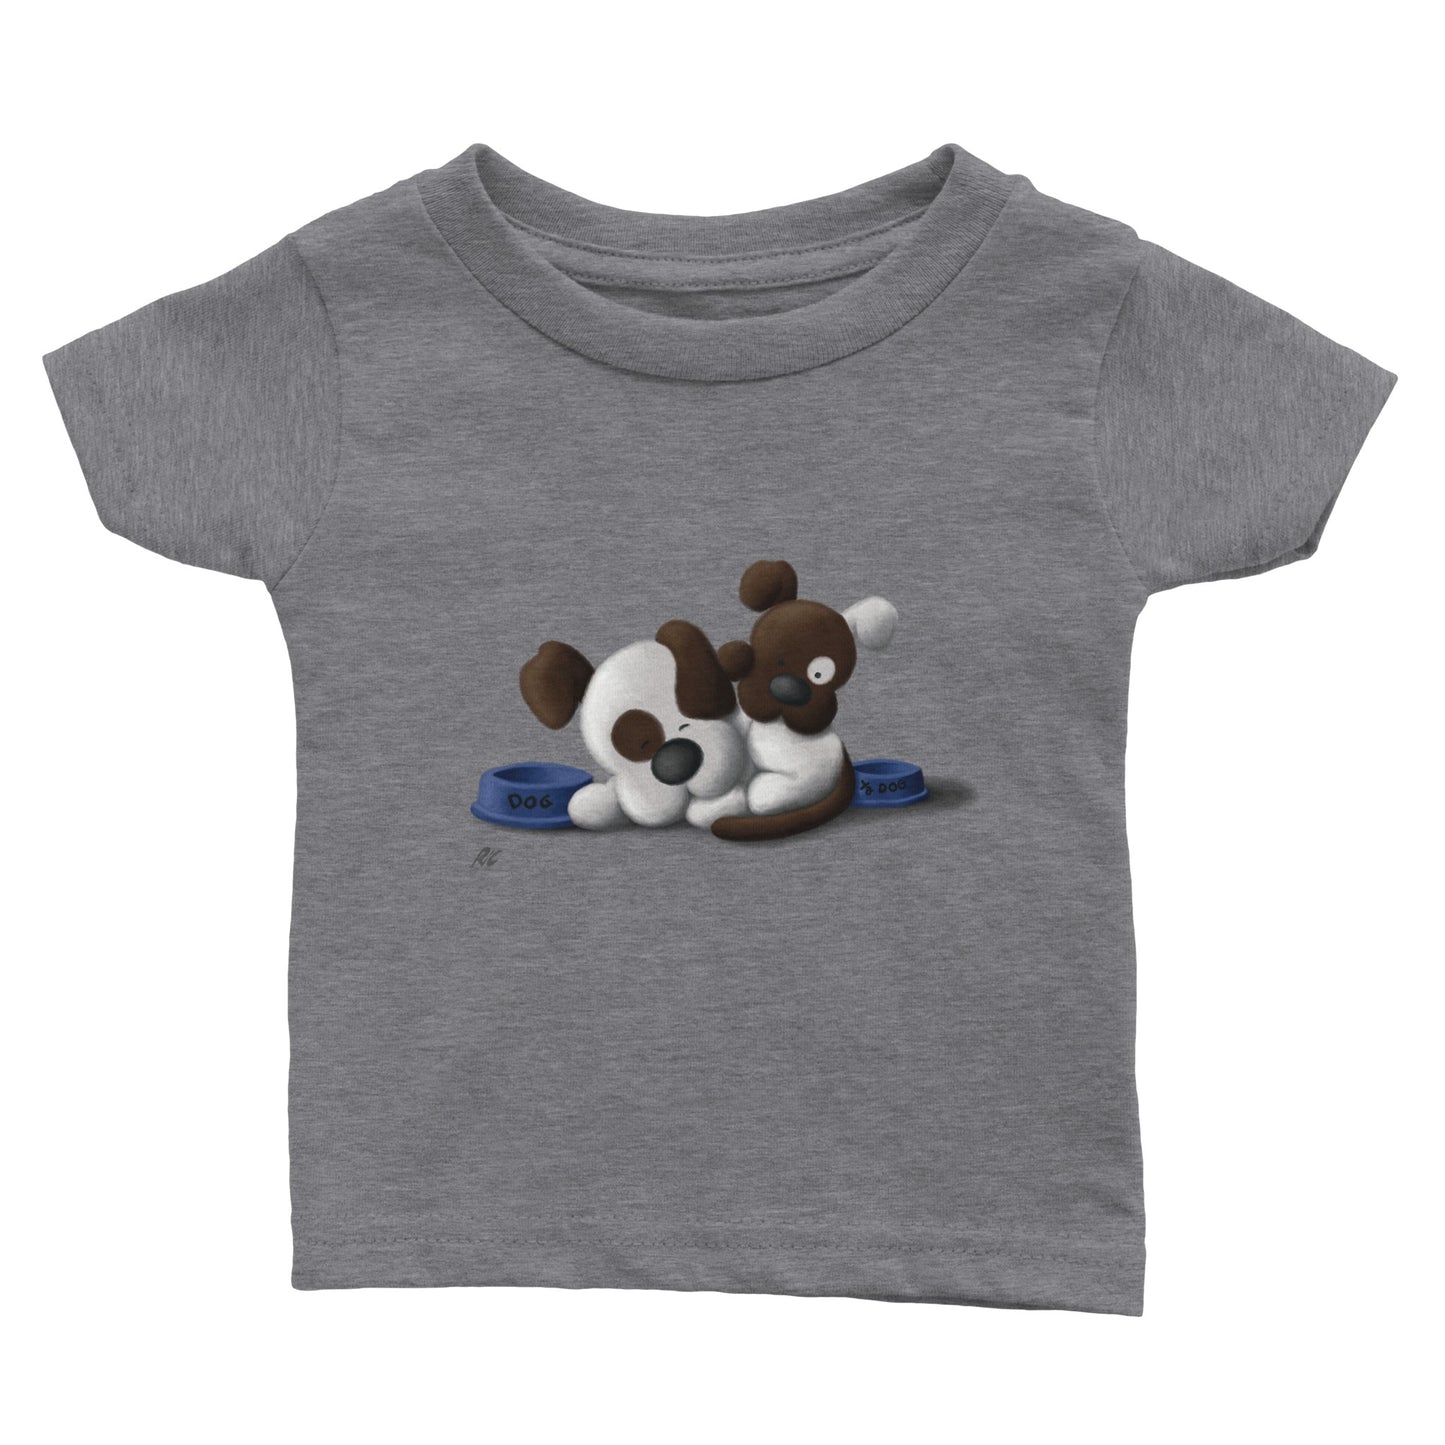 "Wake up Dad, it's time for Dinner!" - Baby Crewneck T-shirt